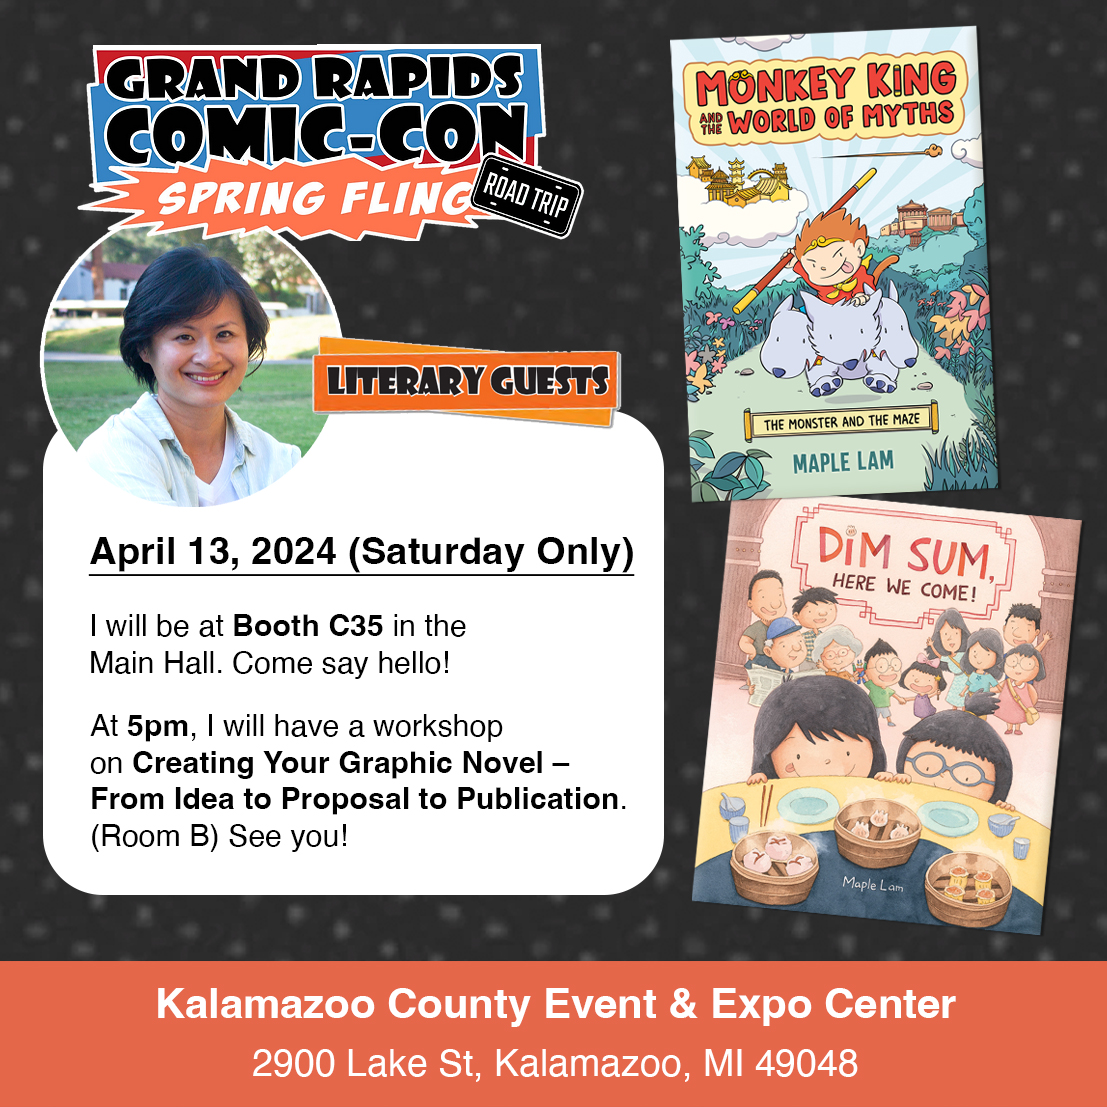 Friends and readers in Michigan, I will be at Grand Rapids Comic Con @grcomiccon this Saturday (Apr 13), signing books and sharing my graphic novel creative process at a workshop. Come say hi! 😊 #grandrapidscomiccon #grandrapidsmichigan #comic #kidlit #graphicnovel #monkeyking